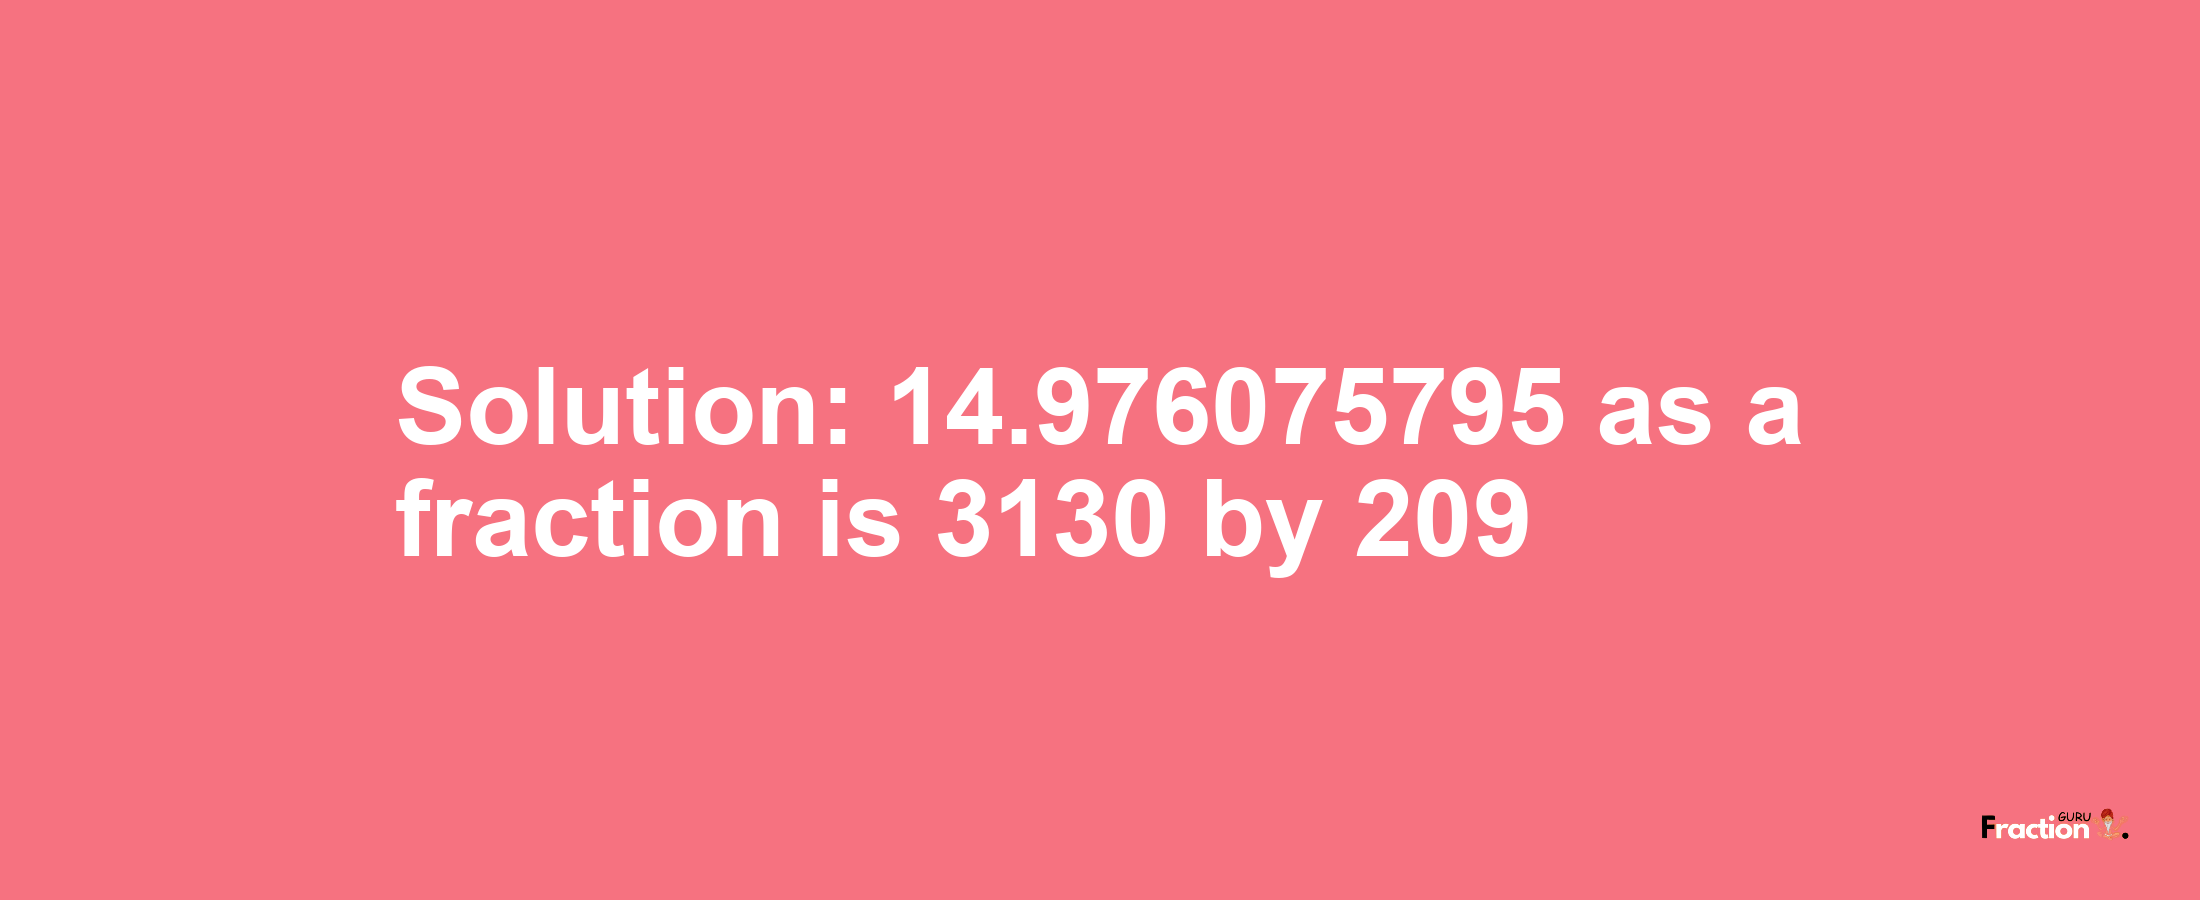 Solution:14.976075795 as a fraction is 3130/209